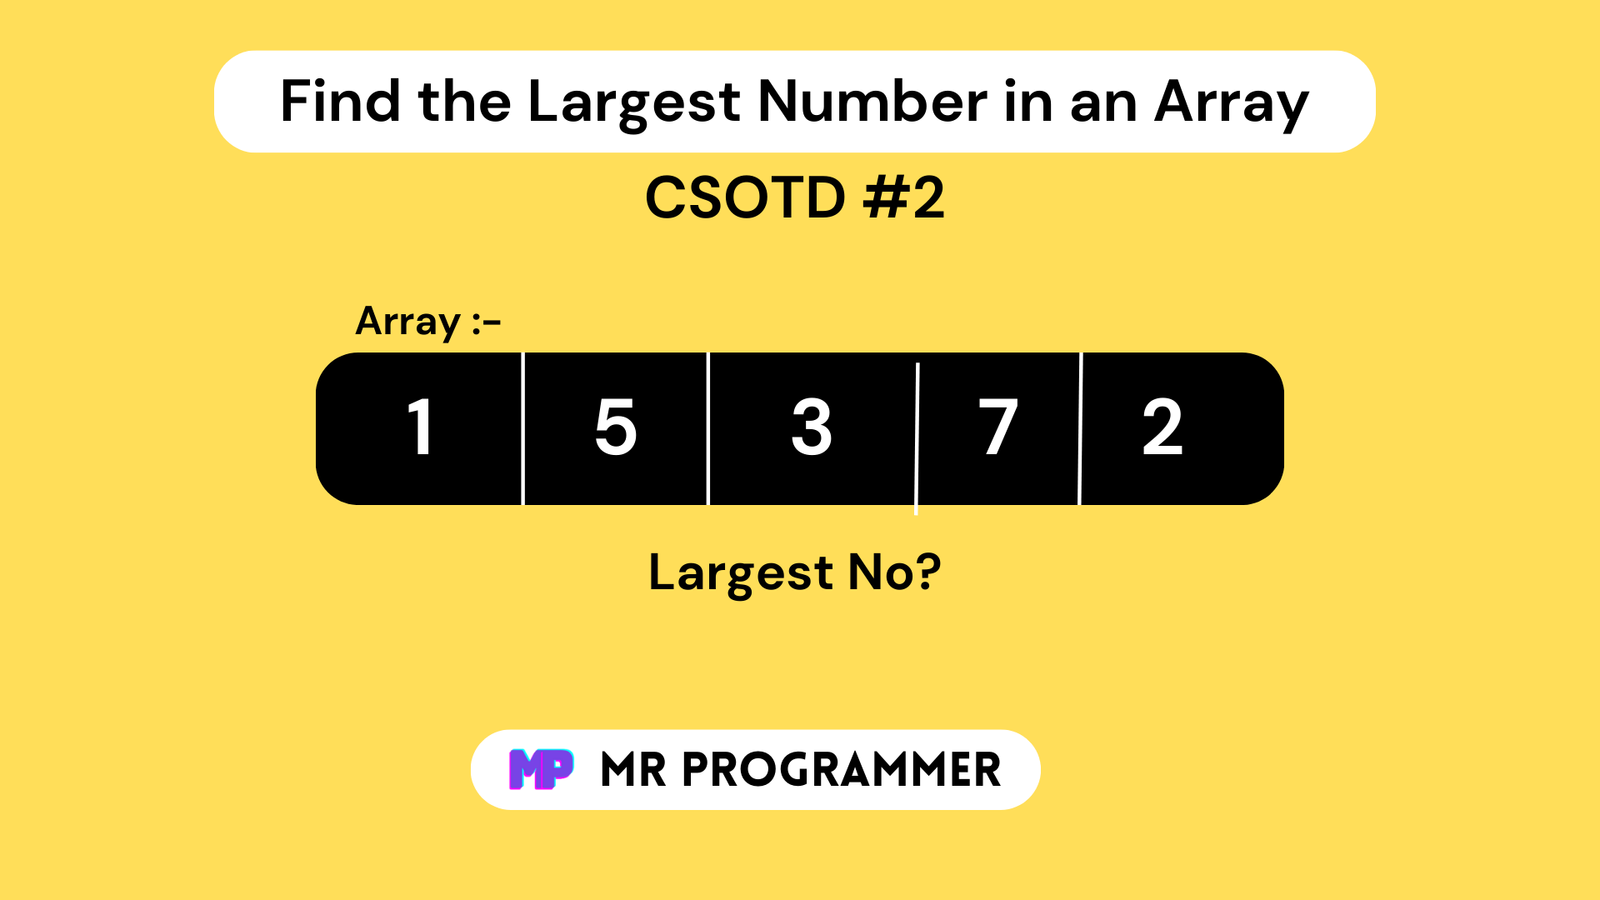 Find the Largest Number in an Array